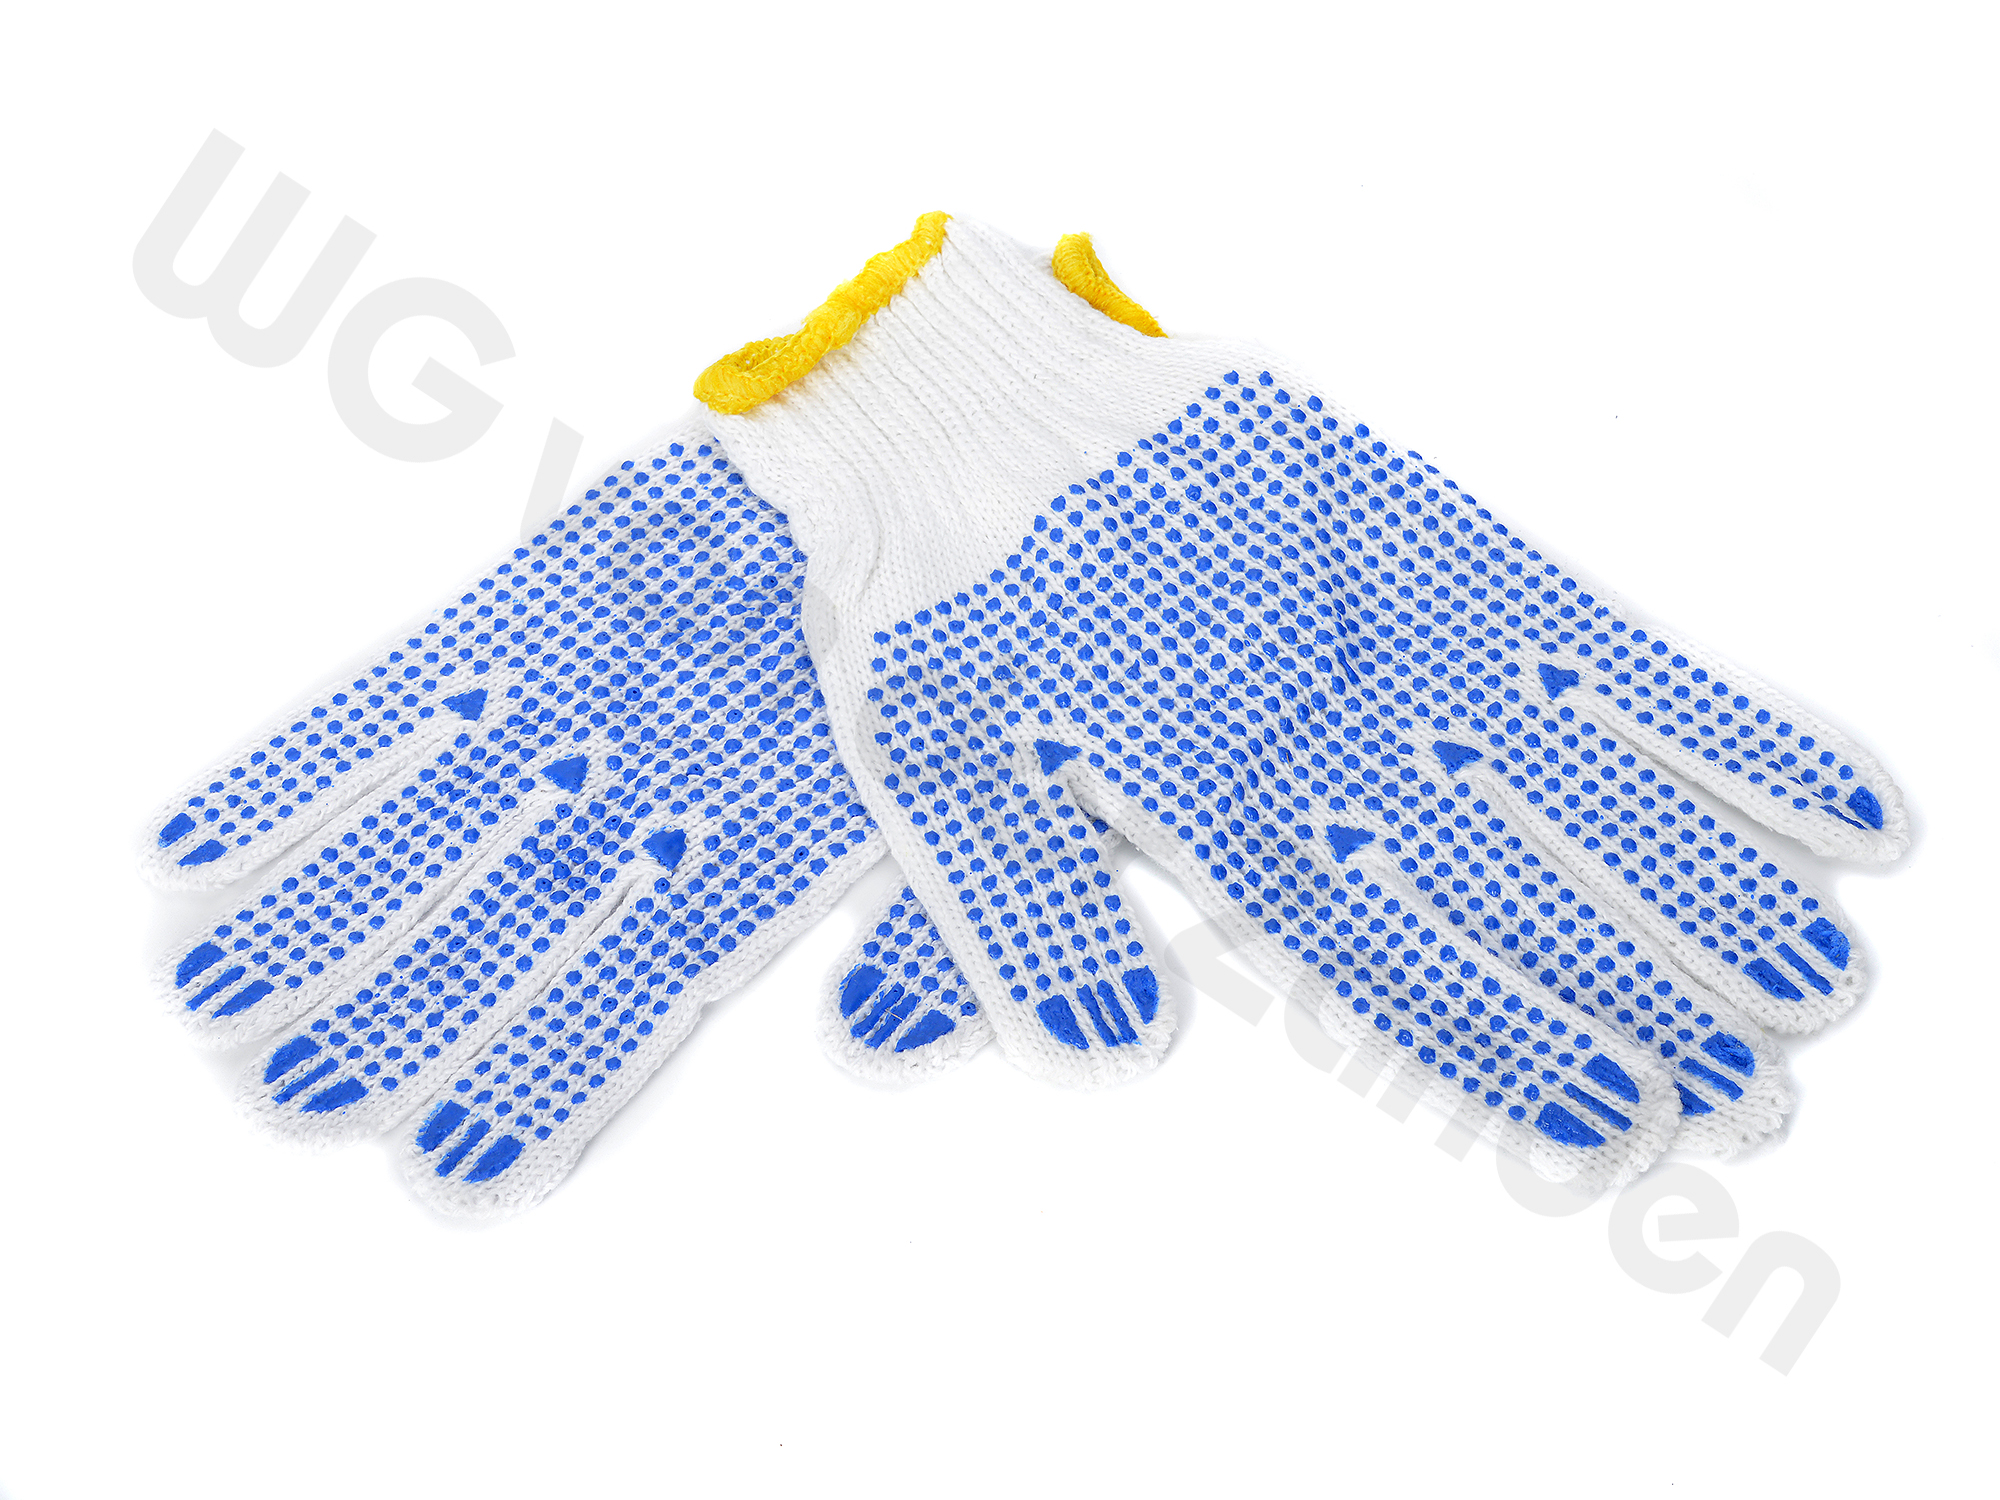 880021 GLOVES WORKING KNITTED NON SLIP DOTS